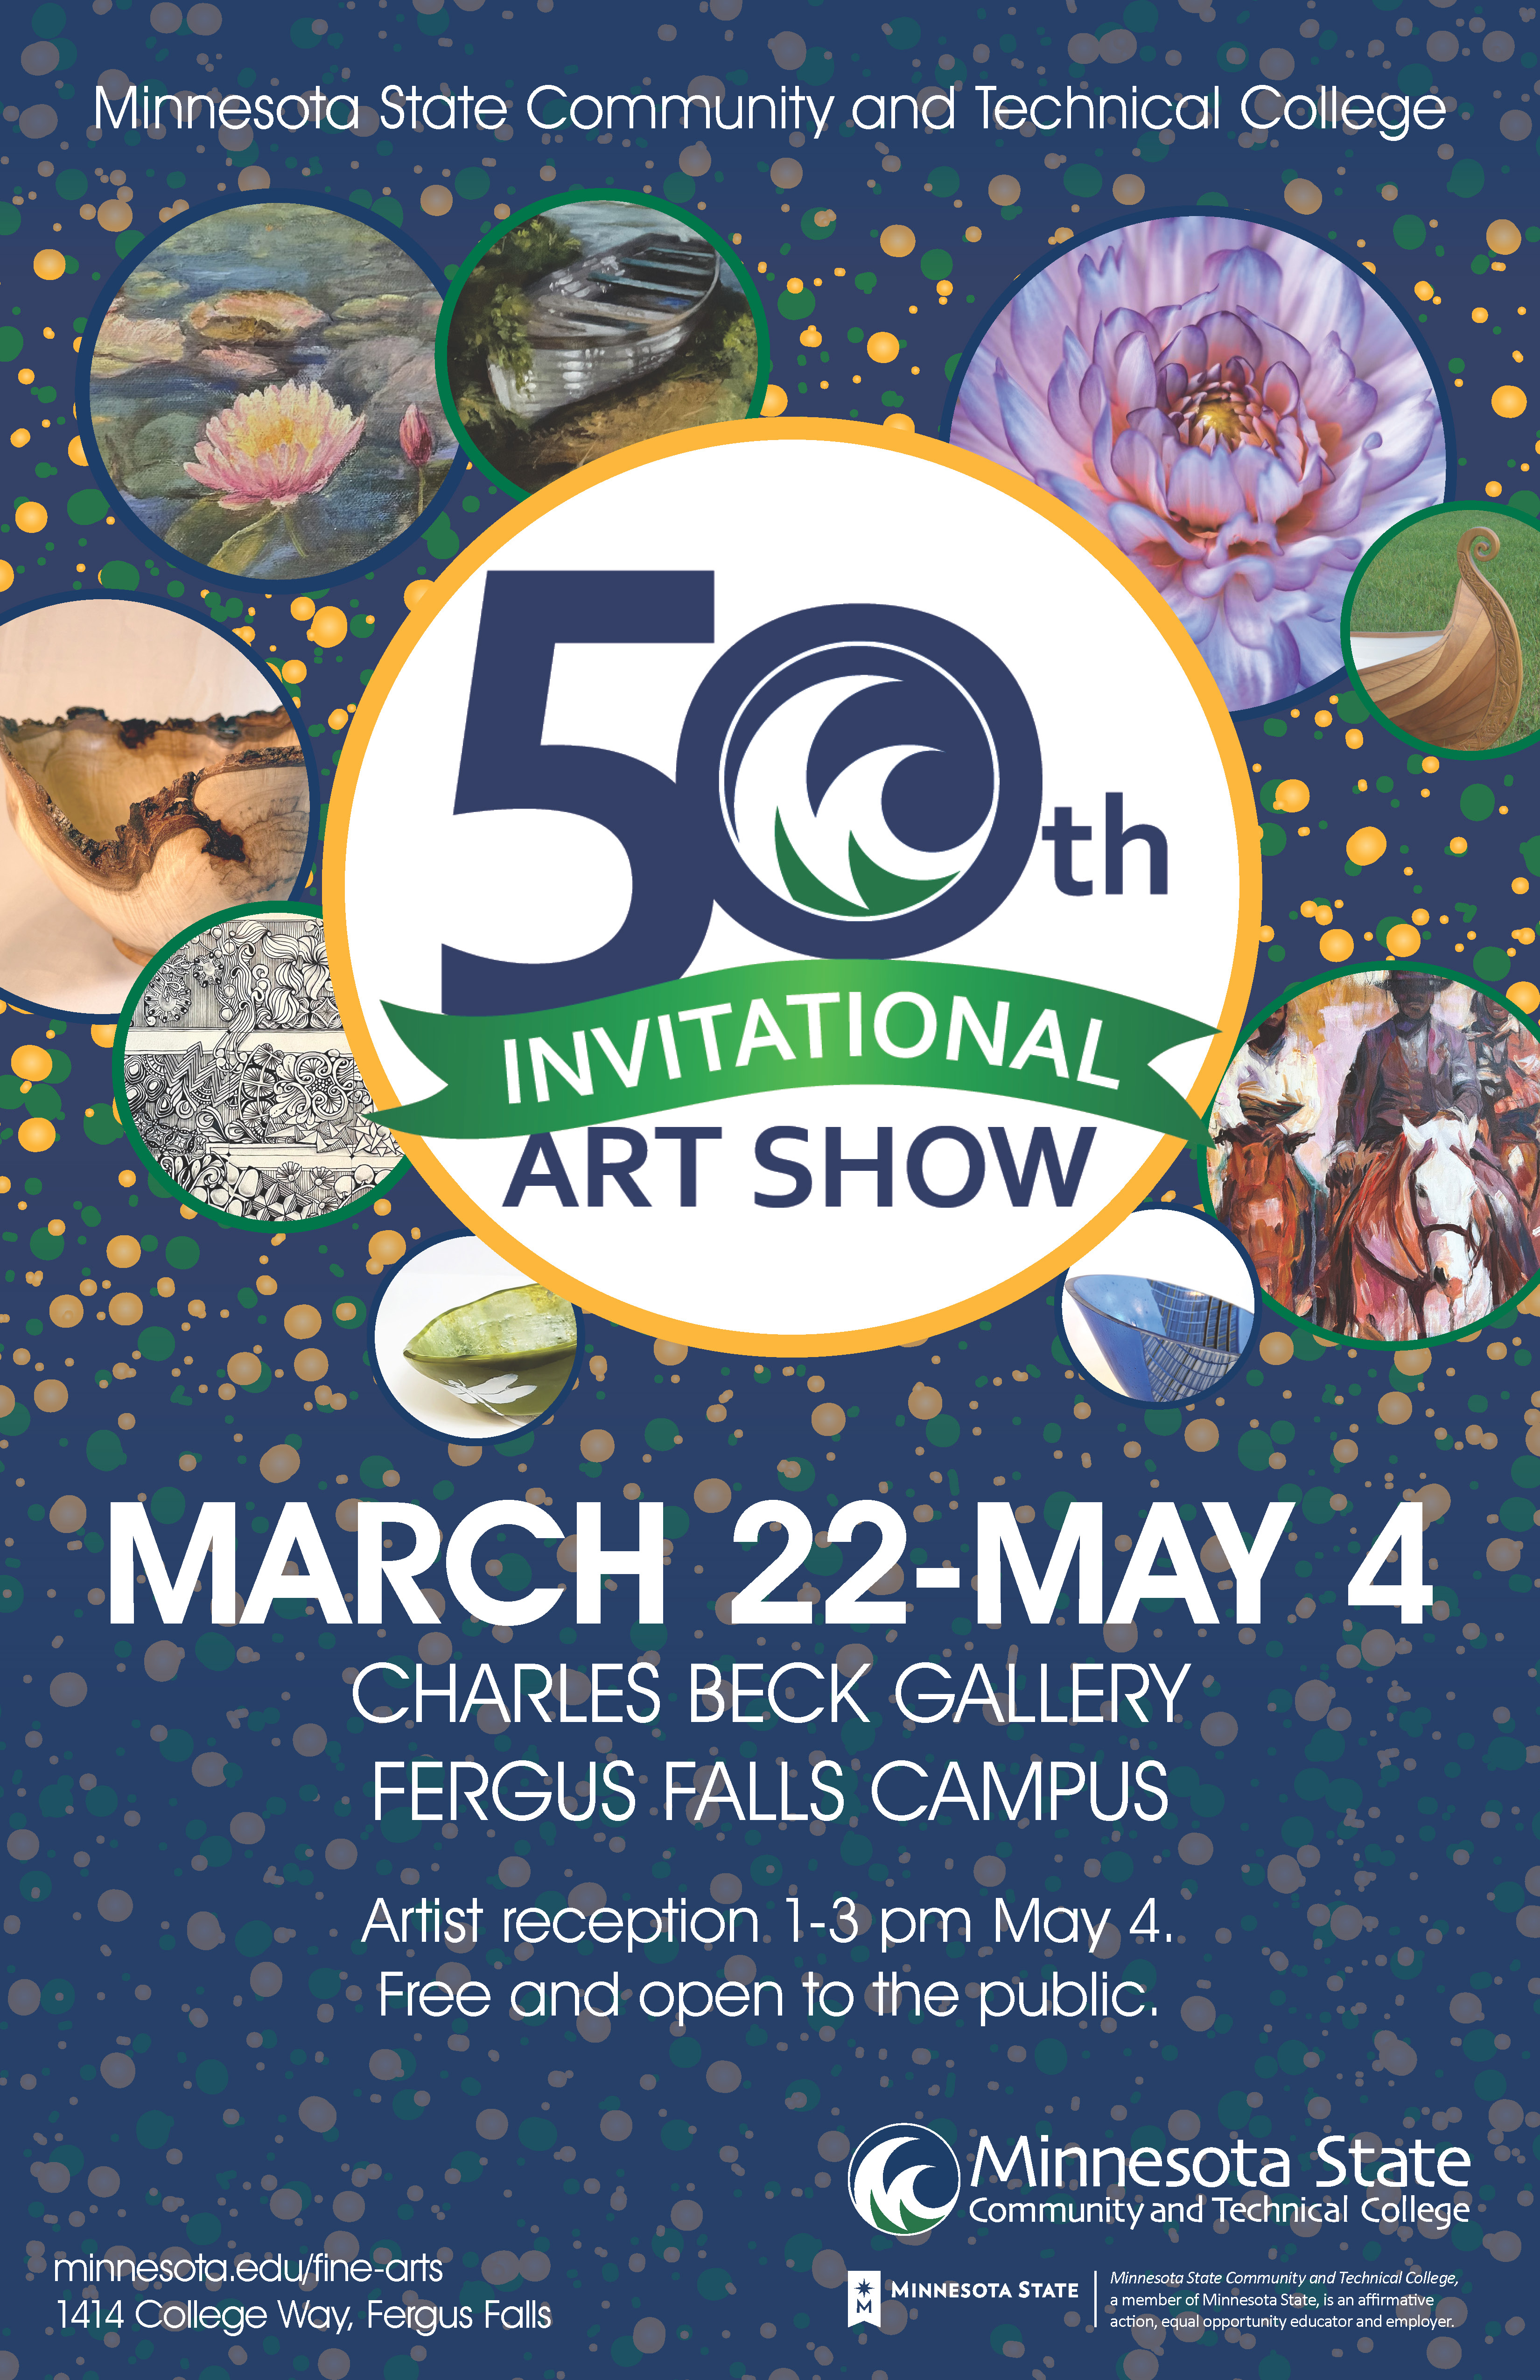 50th Invitational Art Show March 22-May 4 Charles Beck Gallery Fergus Falls Campus